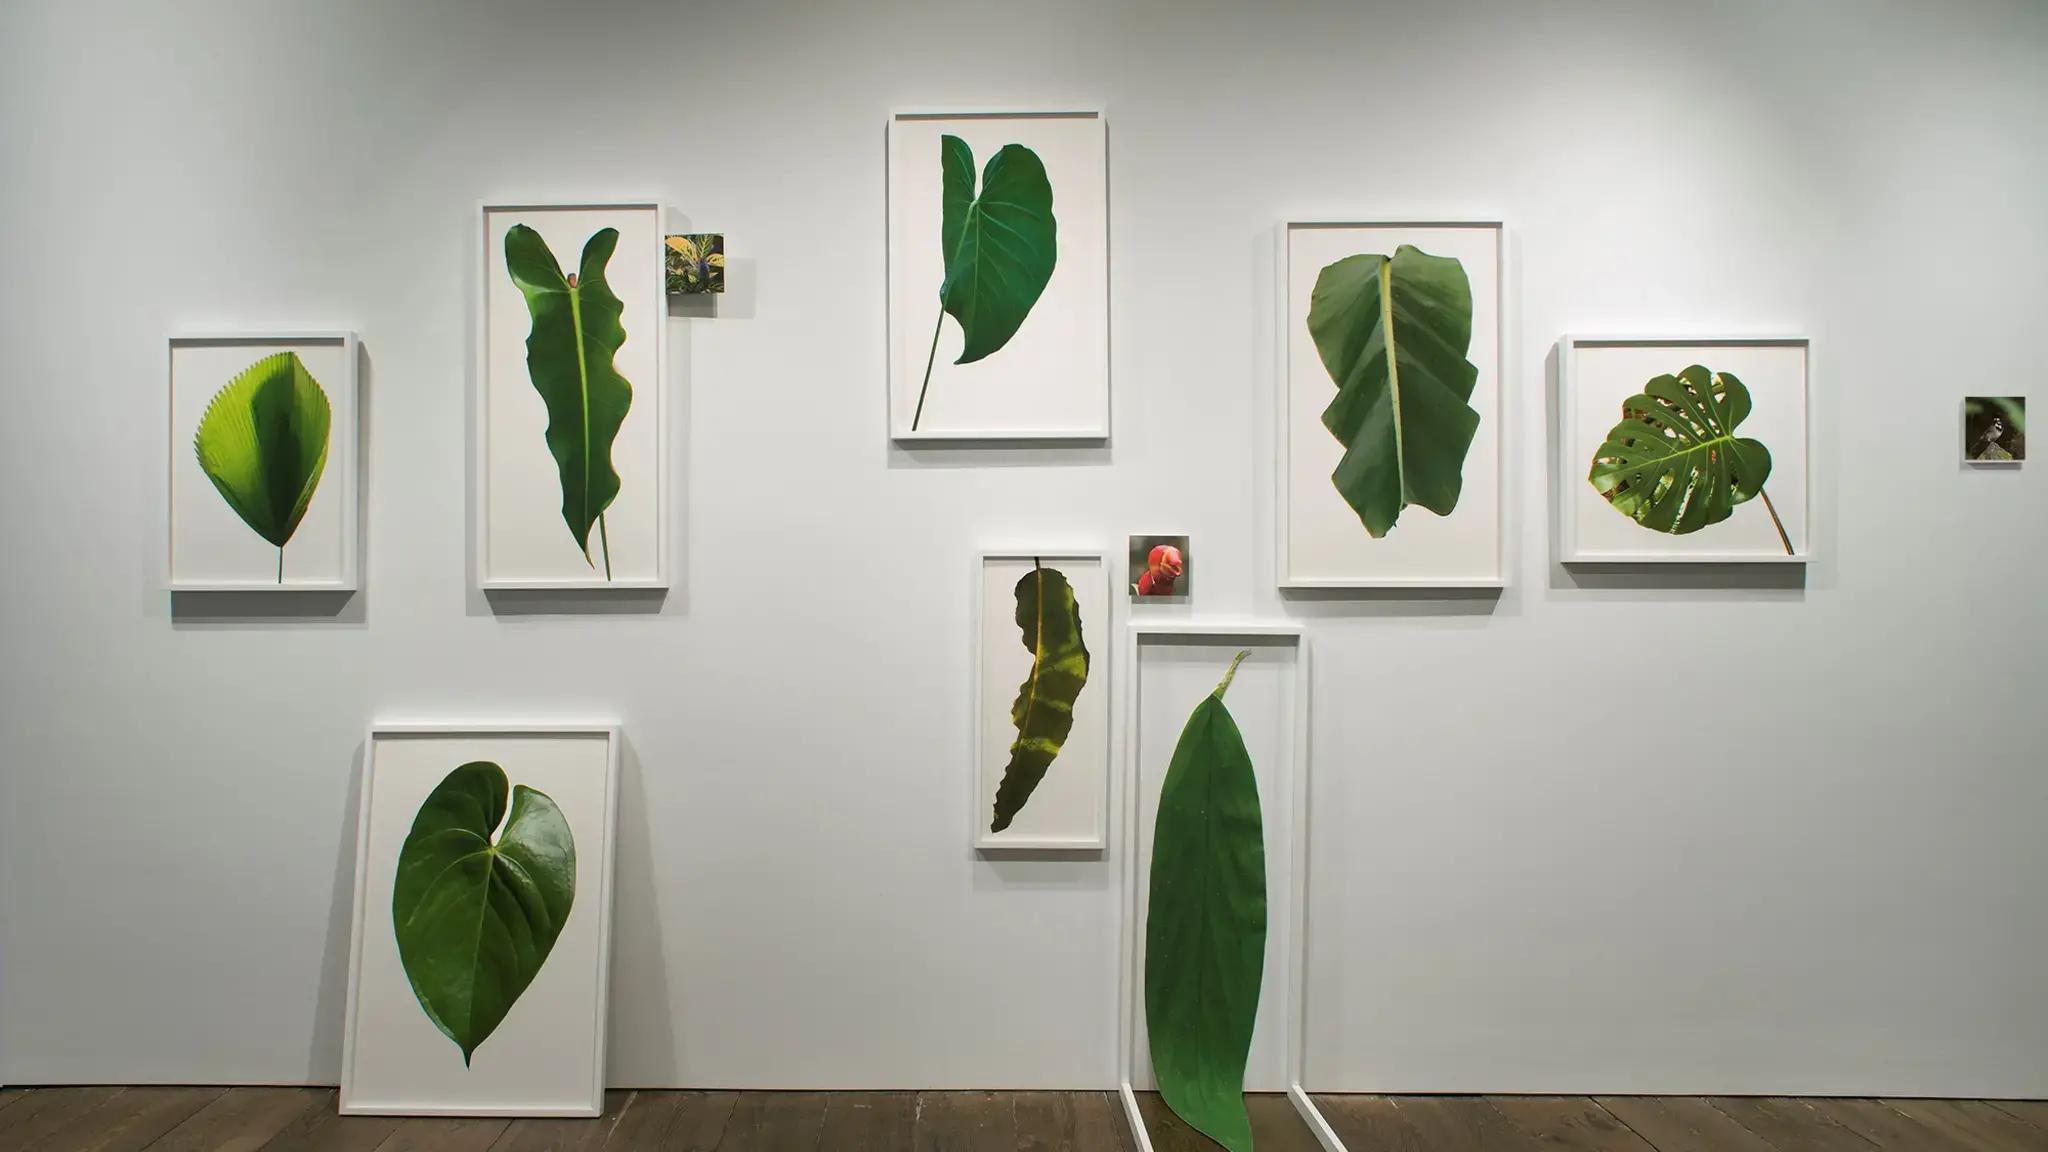 Leaf Wall from the installation &ldquo;Traveling into View&rdquo;, Bridgette Mayer Gallery, 2015. Photo courtesy of the artist.